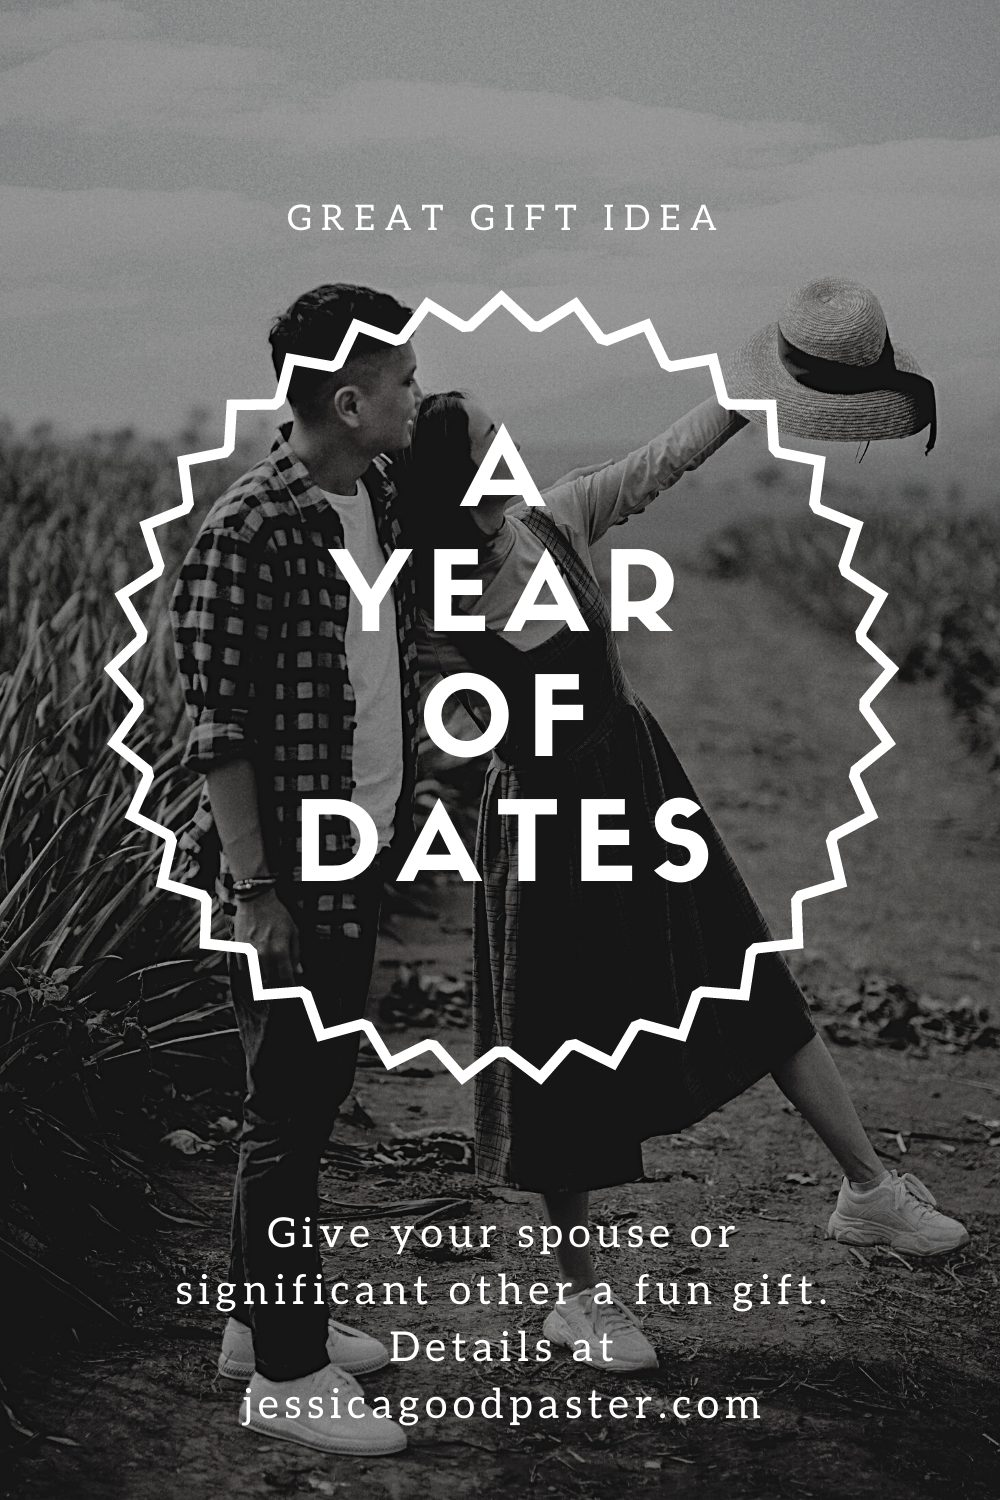 Make A Year of Dates the Best Gift Ever | Time together is the best way to celebrate your husband, wife, boyfriend, or girlfriend! A year of preplanned dates is the gift that keeps on giving. Includes 12 fun date night ideas for any budget. #datenight #dateideas #christmas #valentinesday #giftideas #yearofdates #anniversary